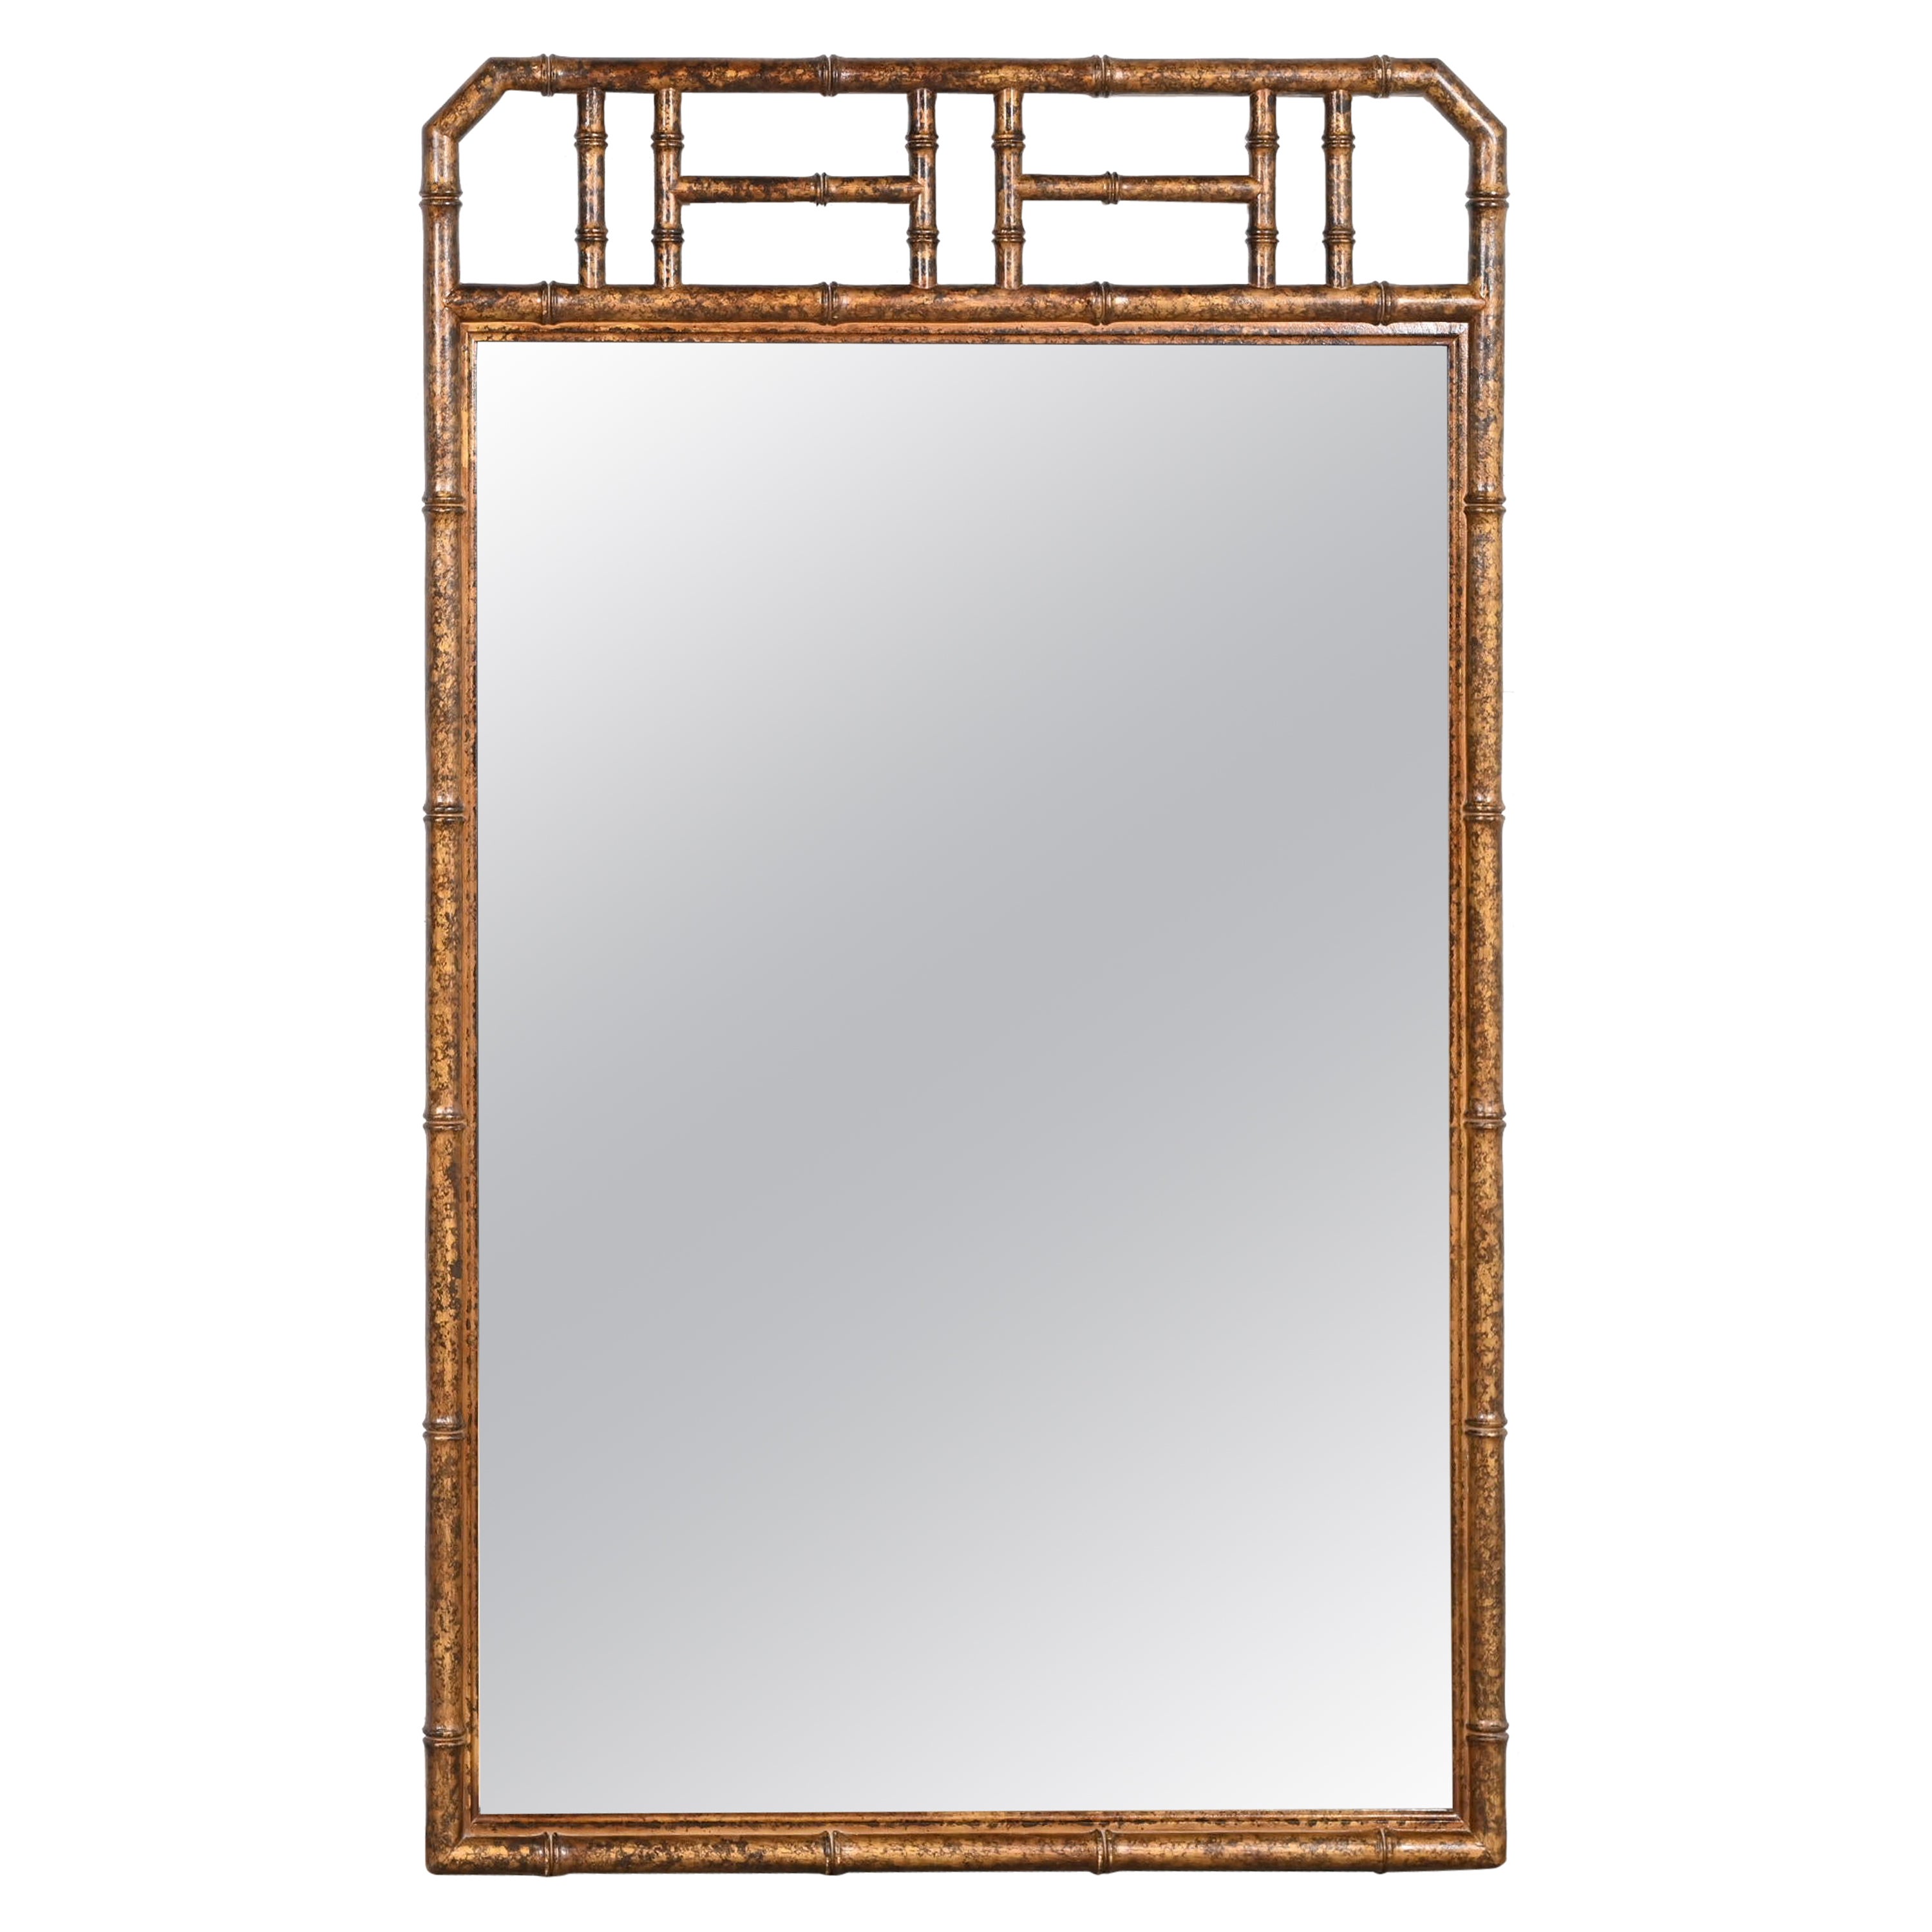 Drexel Heritage Chinoiserie Faux Bamboo Wall Mirror in Faux Tortoise Finish